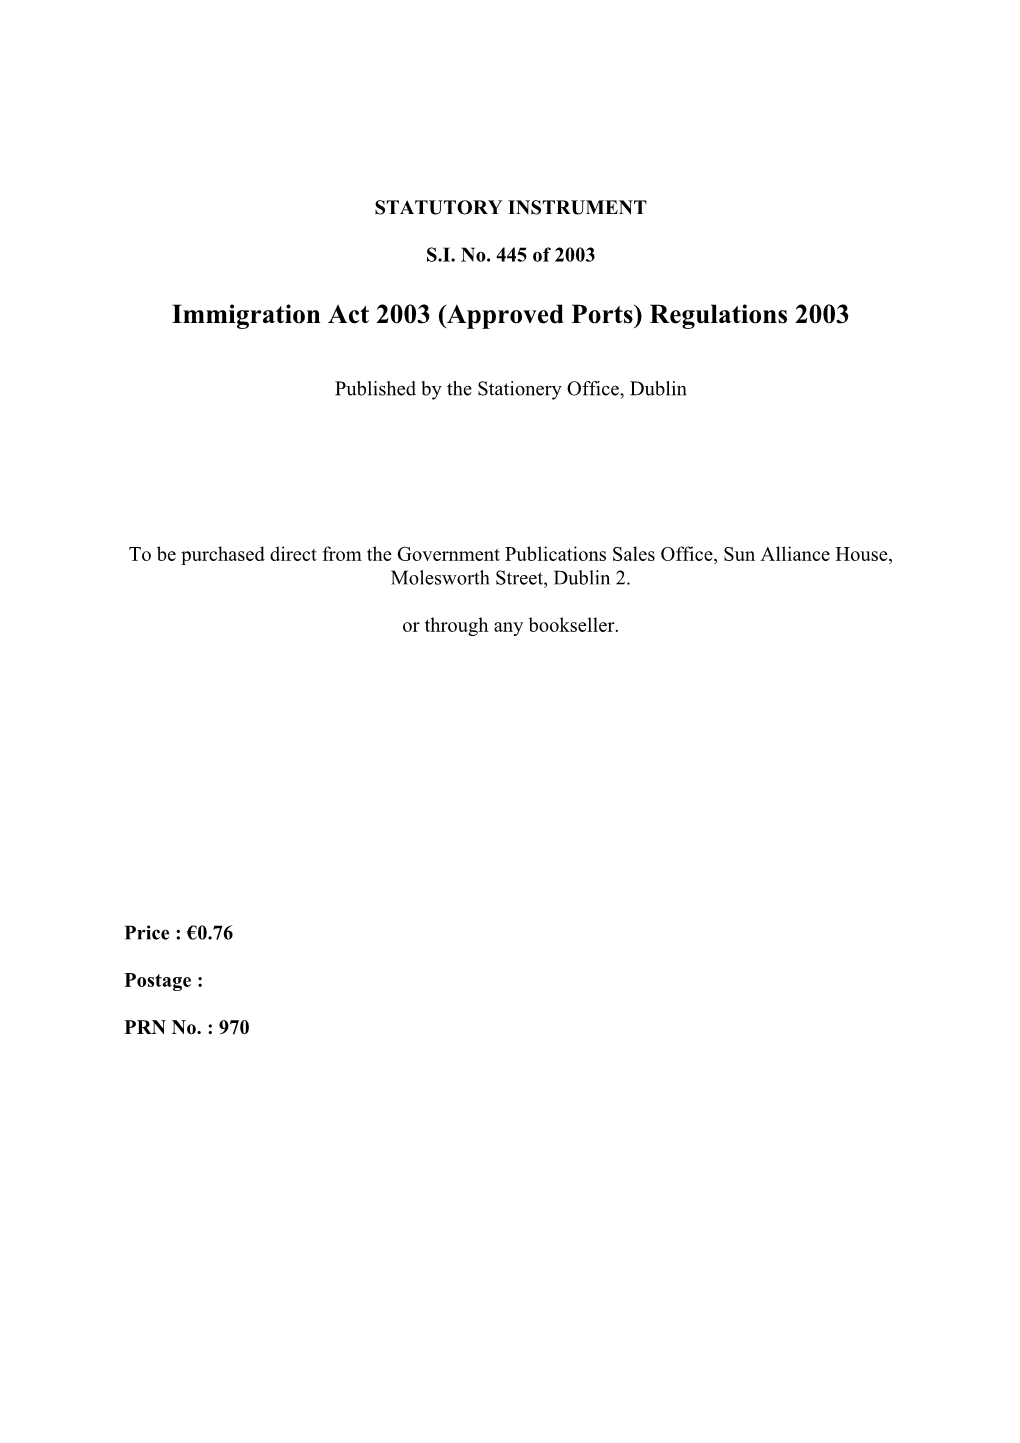 Immigration Act 2003 (Approved Ports) Regulations 2003